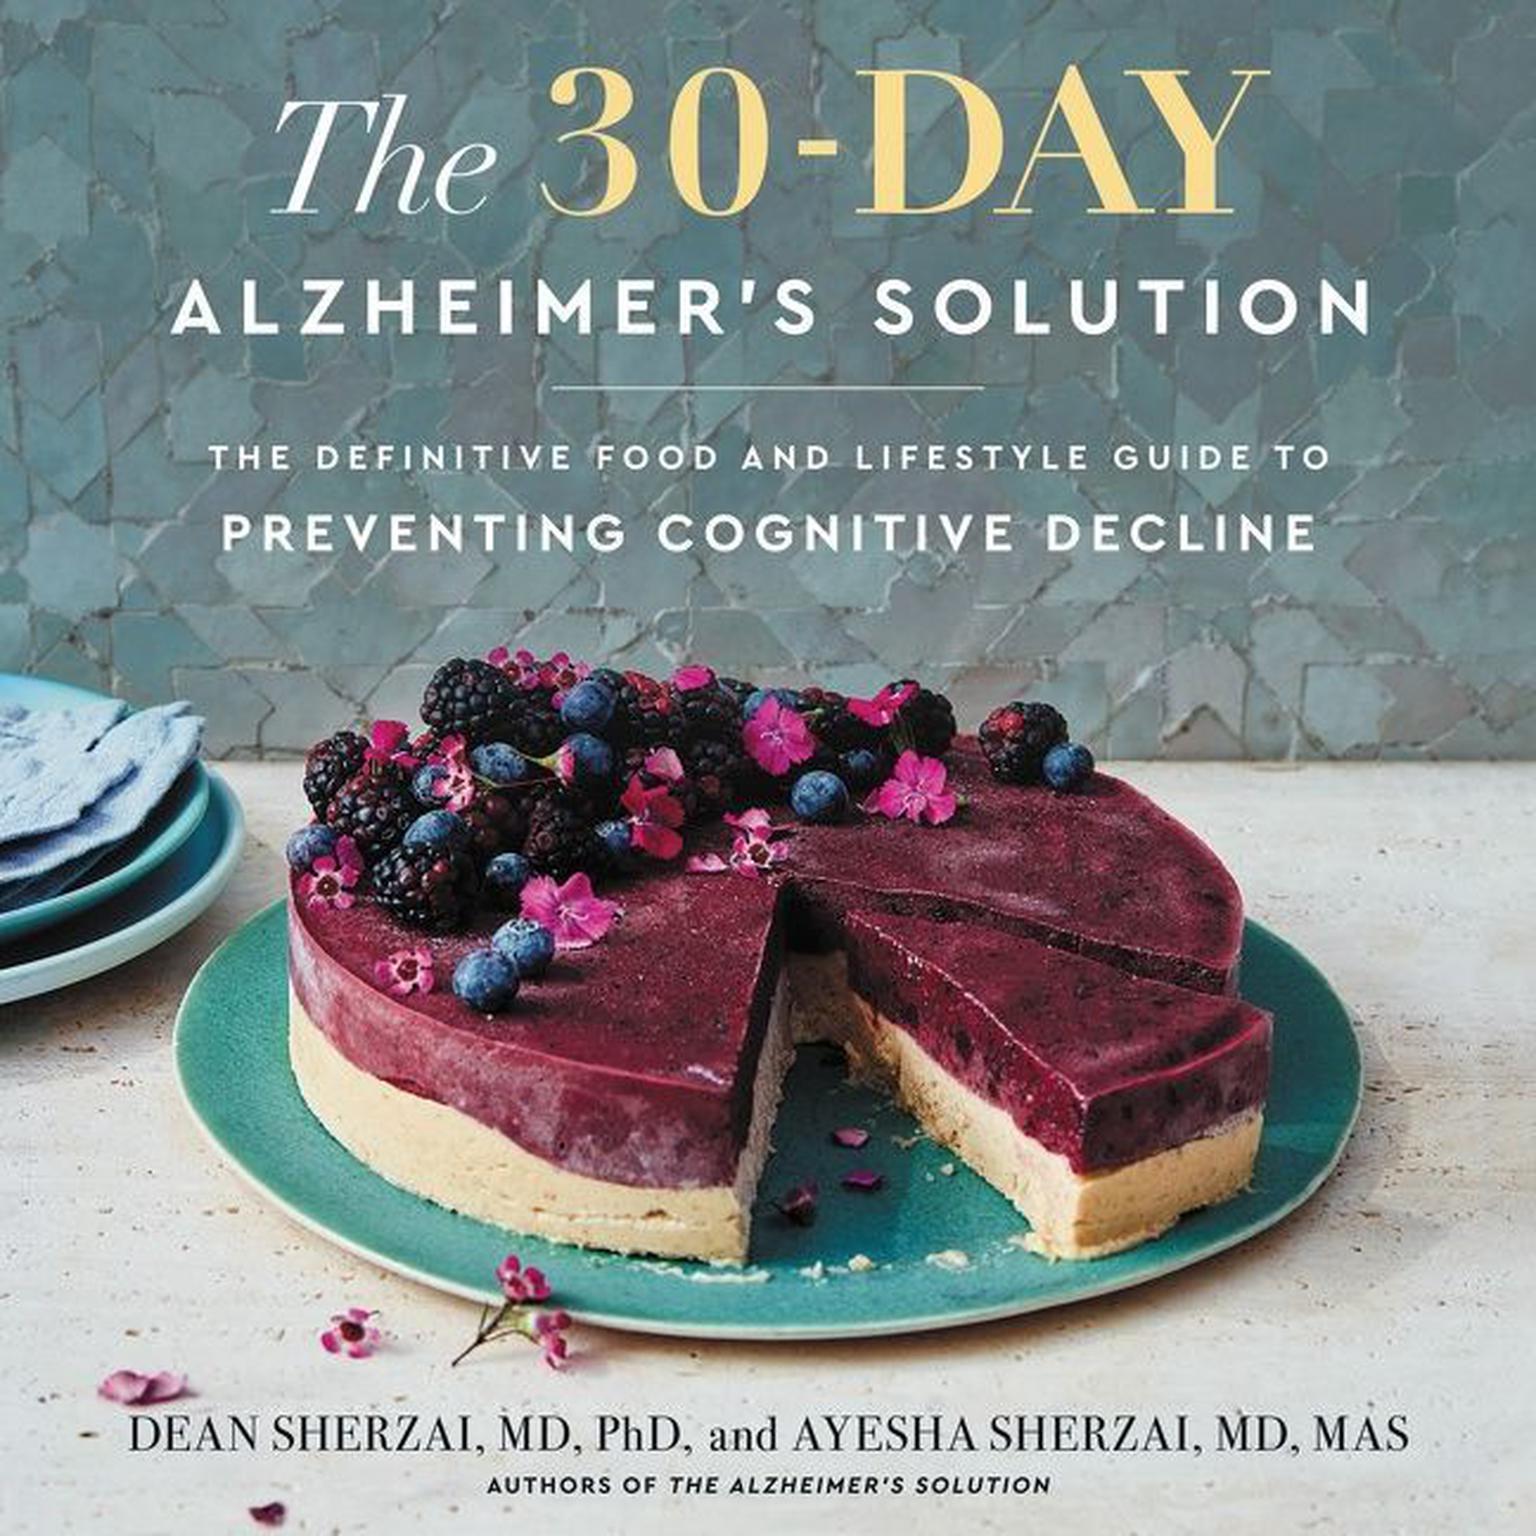 The 30-Day Alzheimers Solution: The Definitive Food and Lifestyle Guide to Preventing Cognitive Decline Audiobook, by Ayesha Sherzai